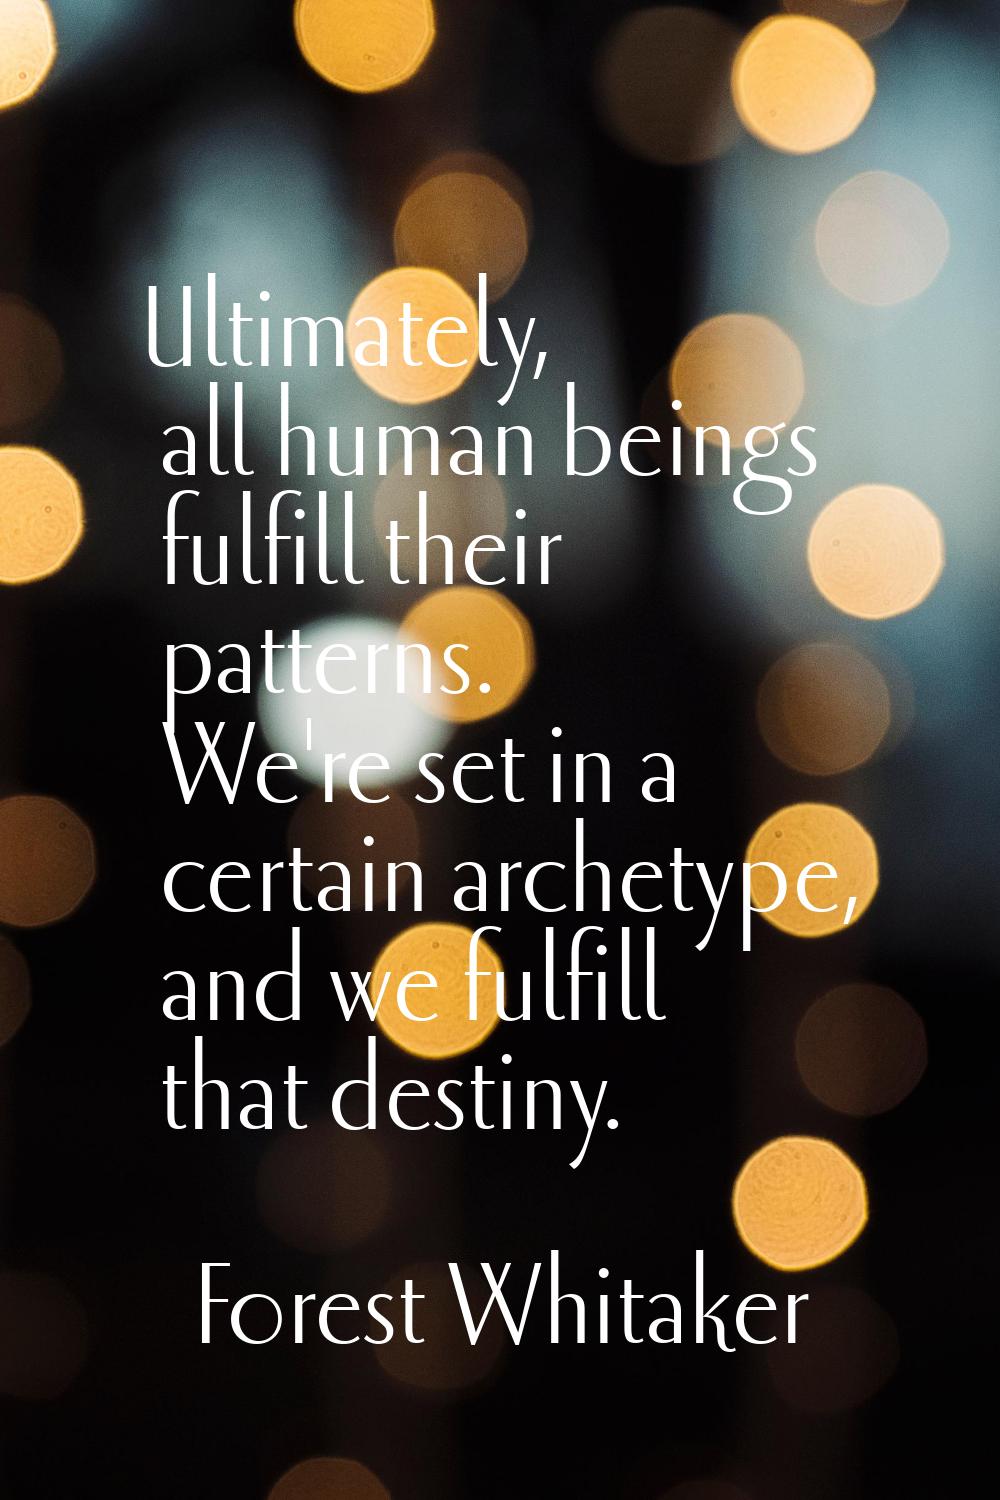 Ultimately, all human beings fulfill their patterns. We're set in a certain archetype, and we fulfi